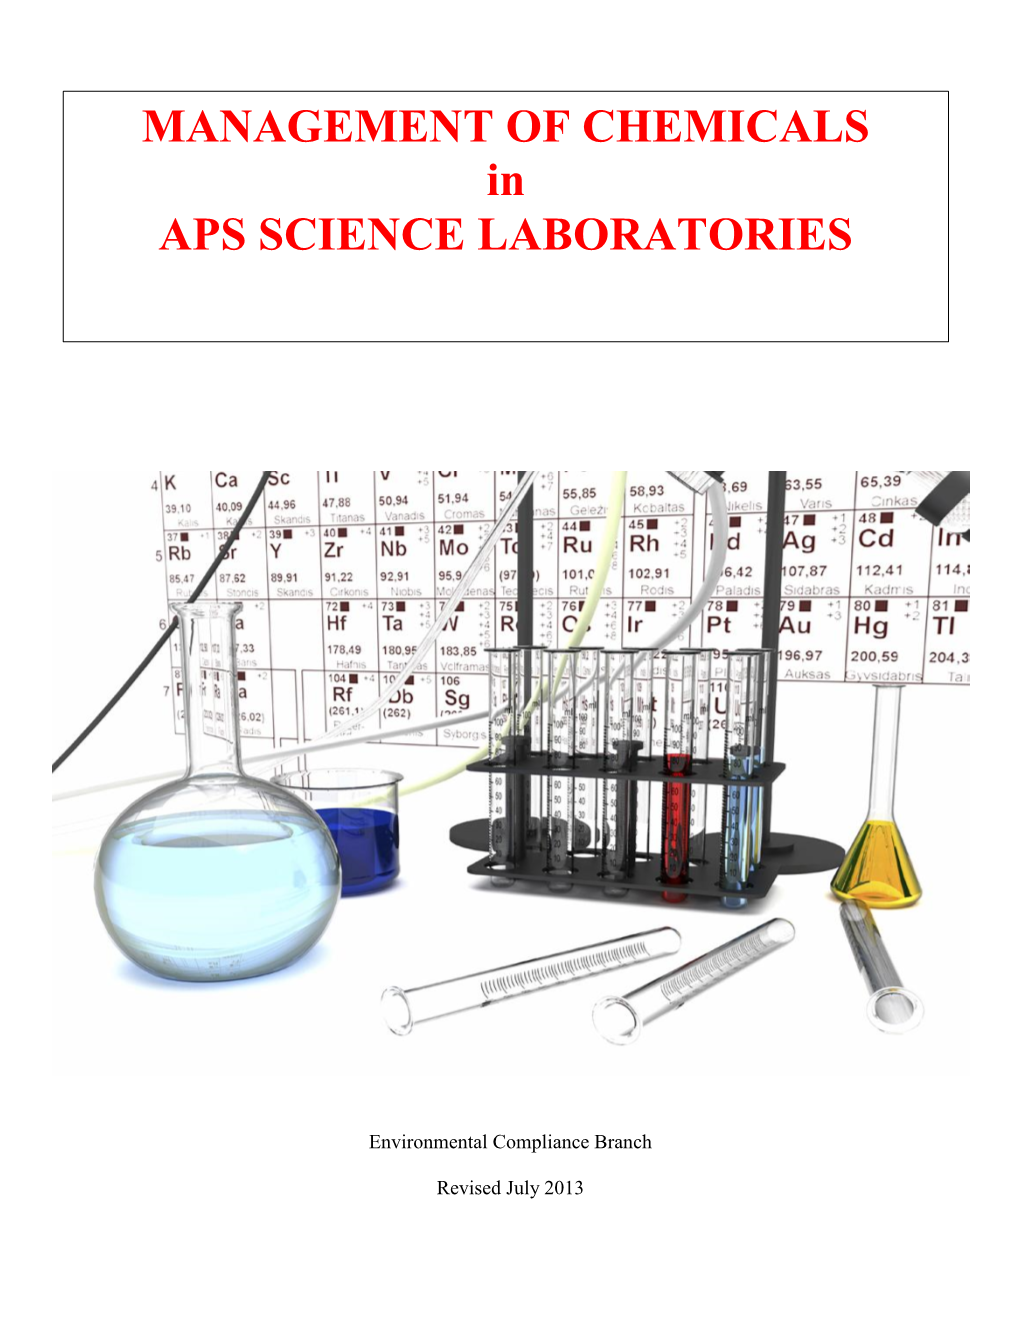 MANAGEMENT of CHEMICALS in APS SCIENCE LABORATORIES